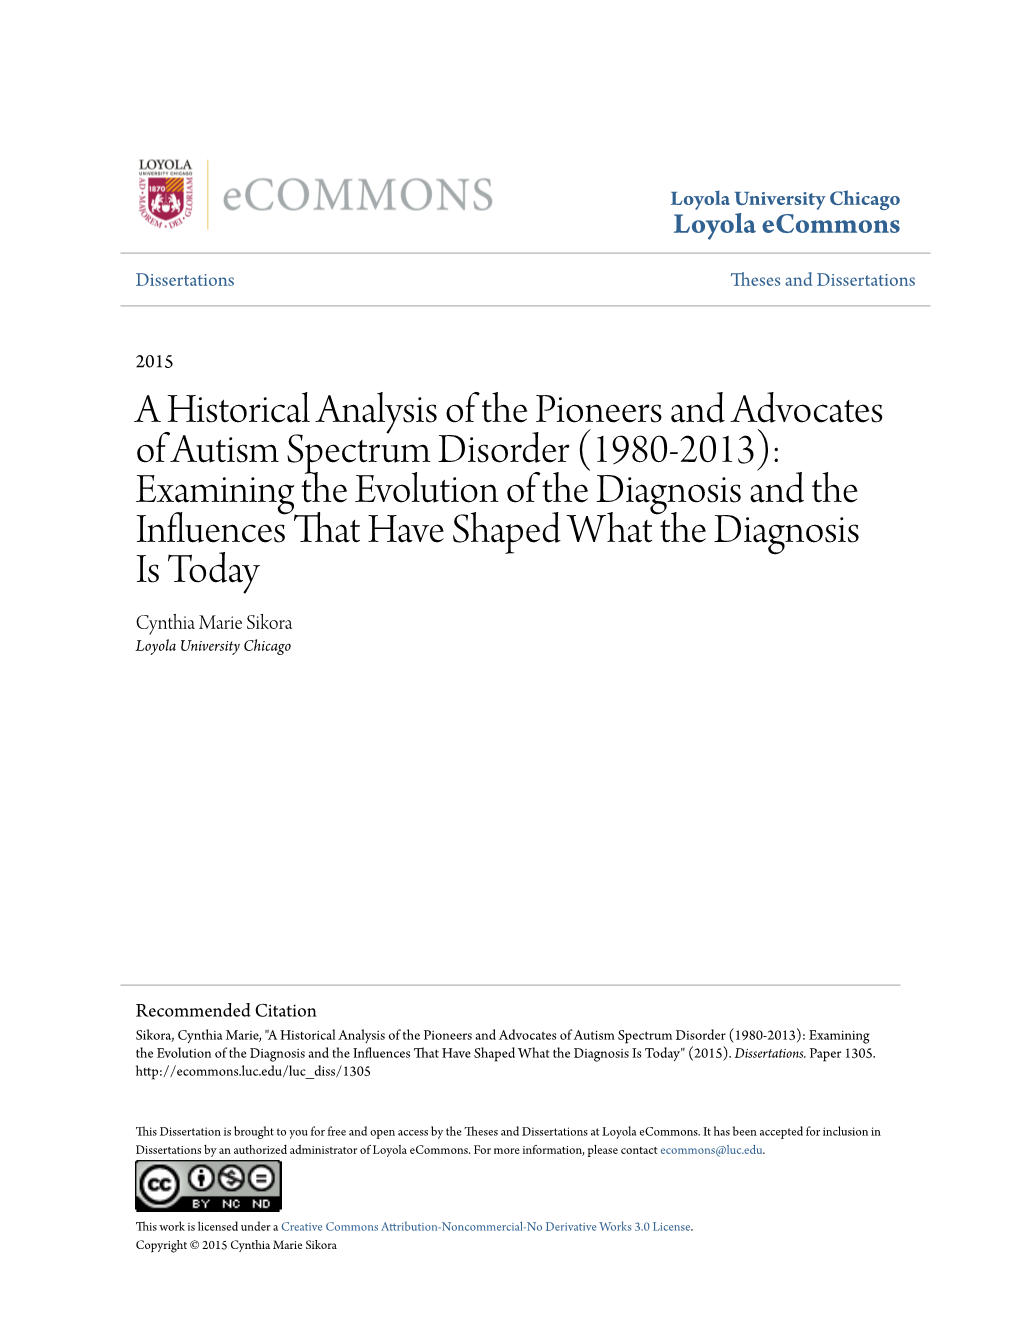 A Historical Analysis of the Pioneers and Advocates of Autism